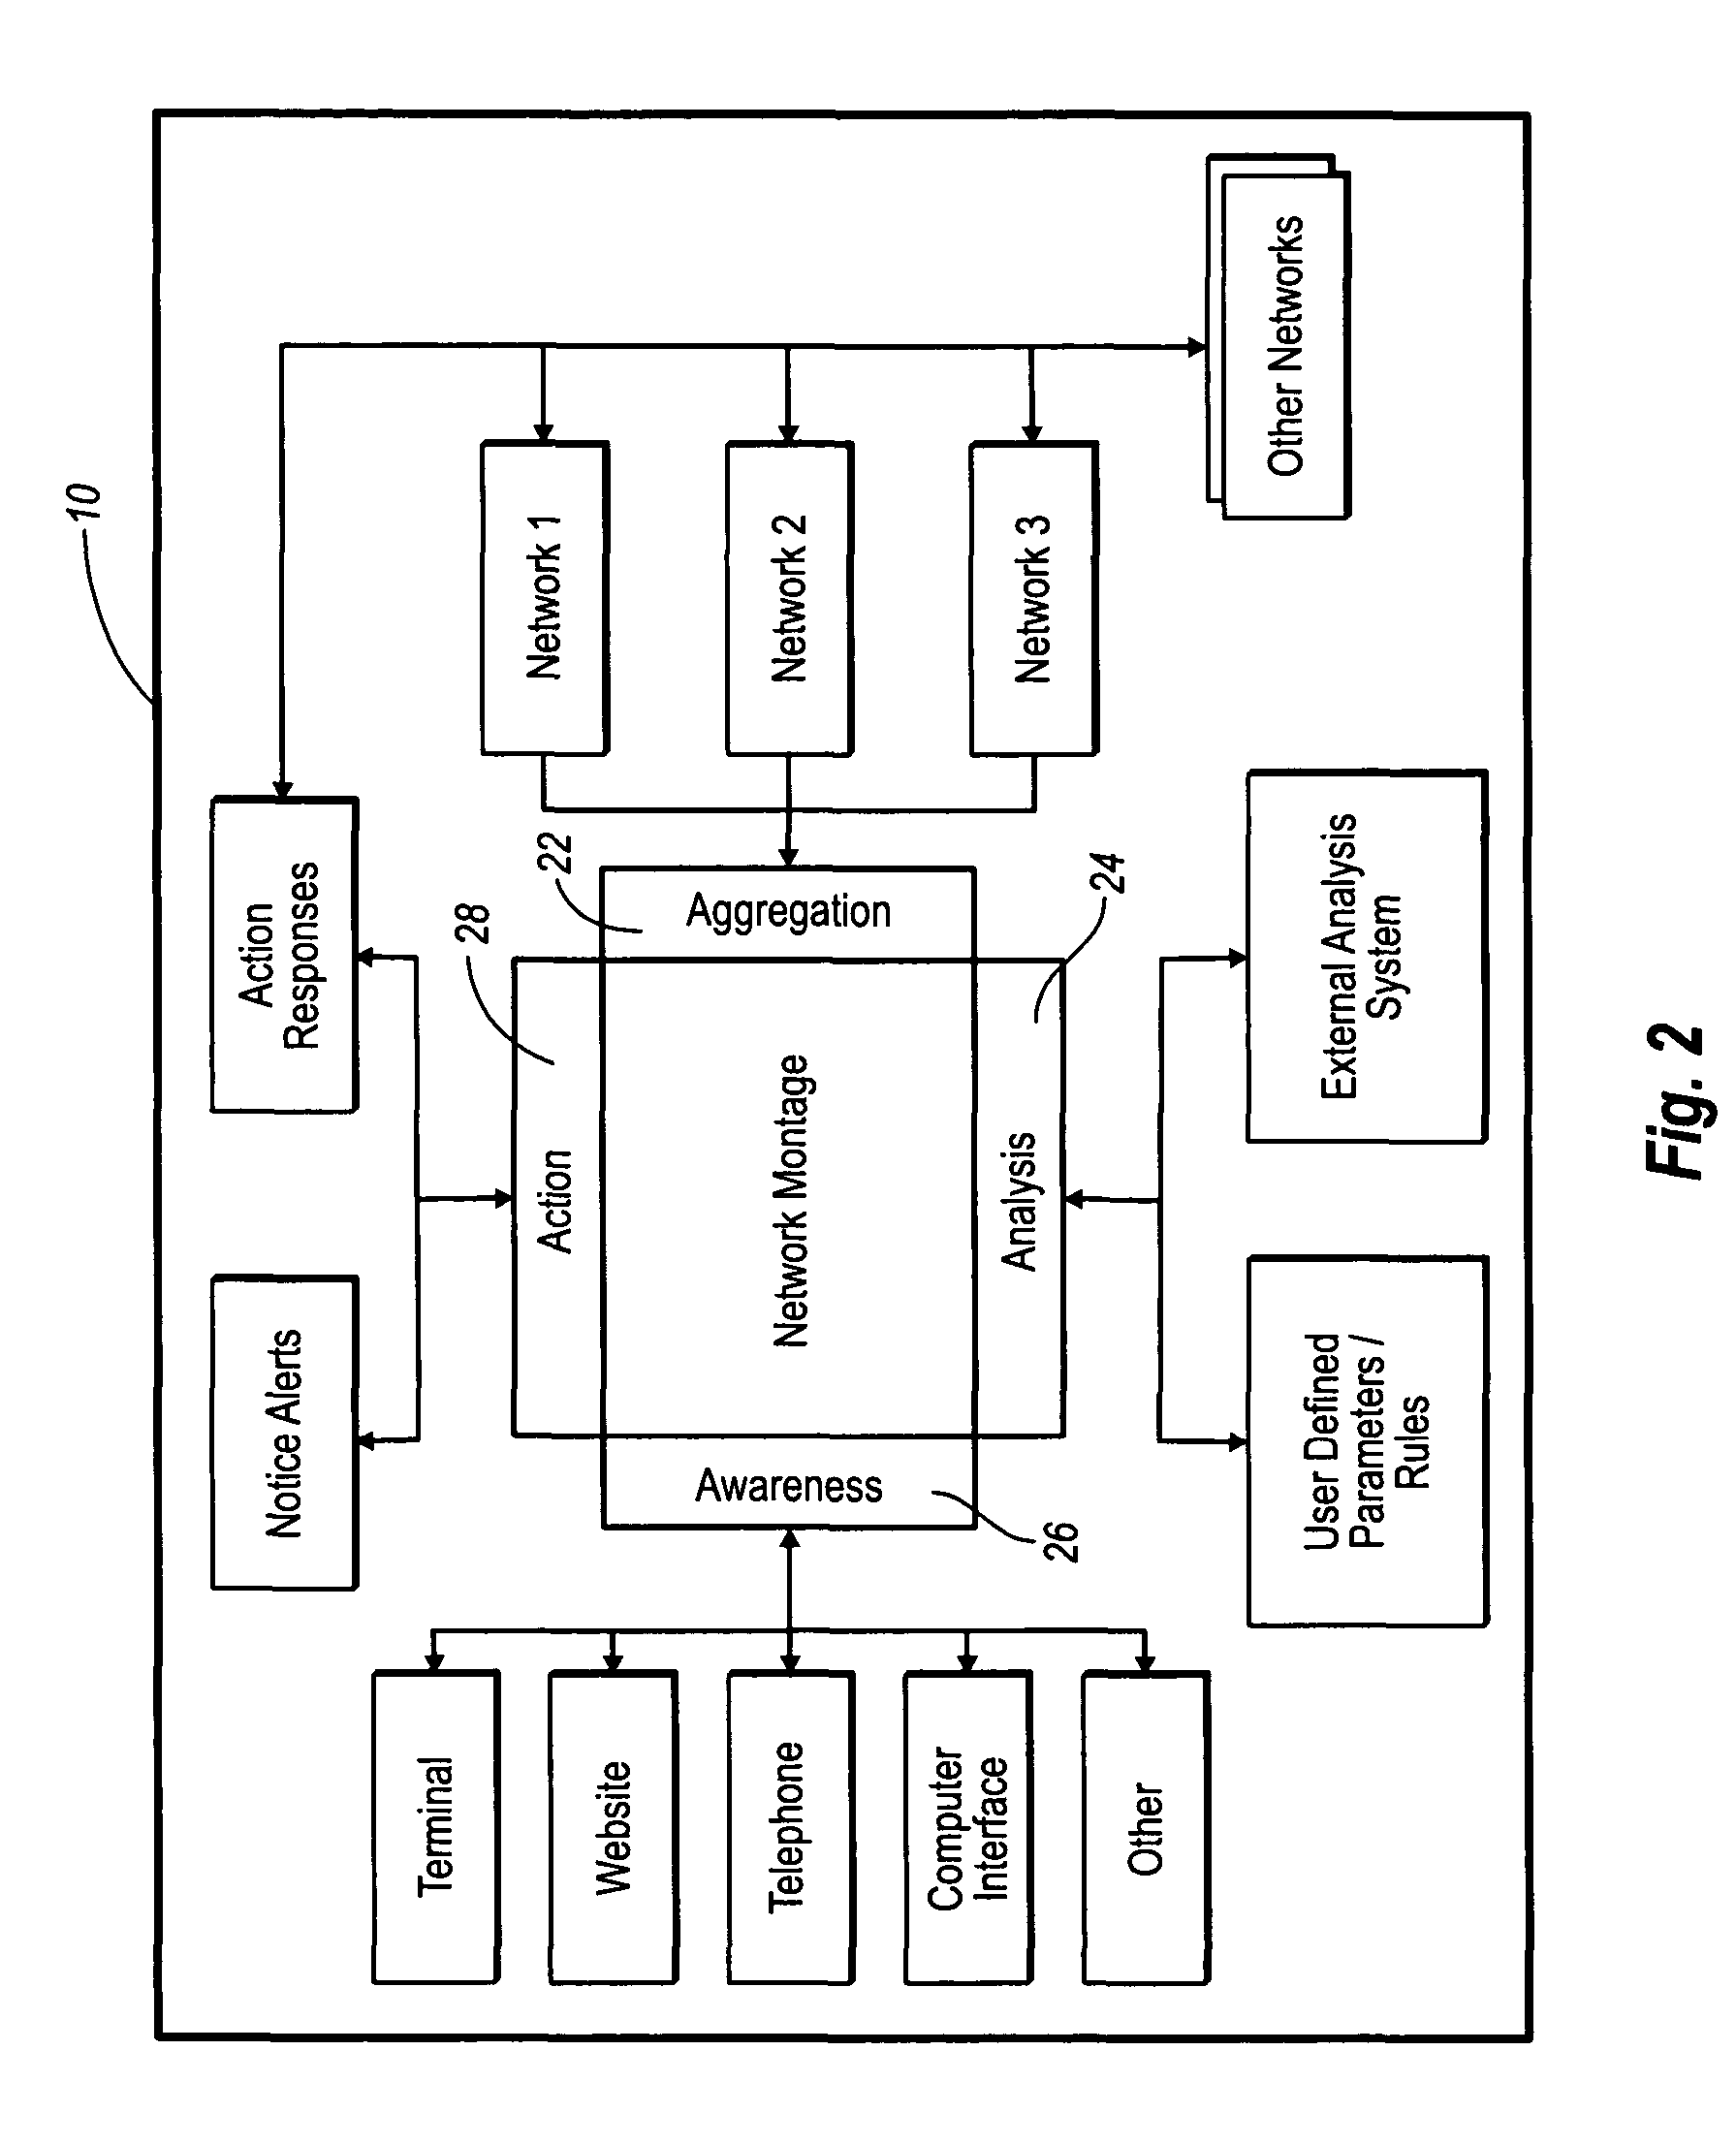 Financial data processing system